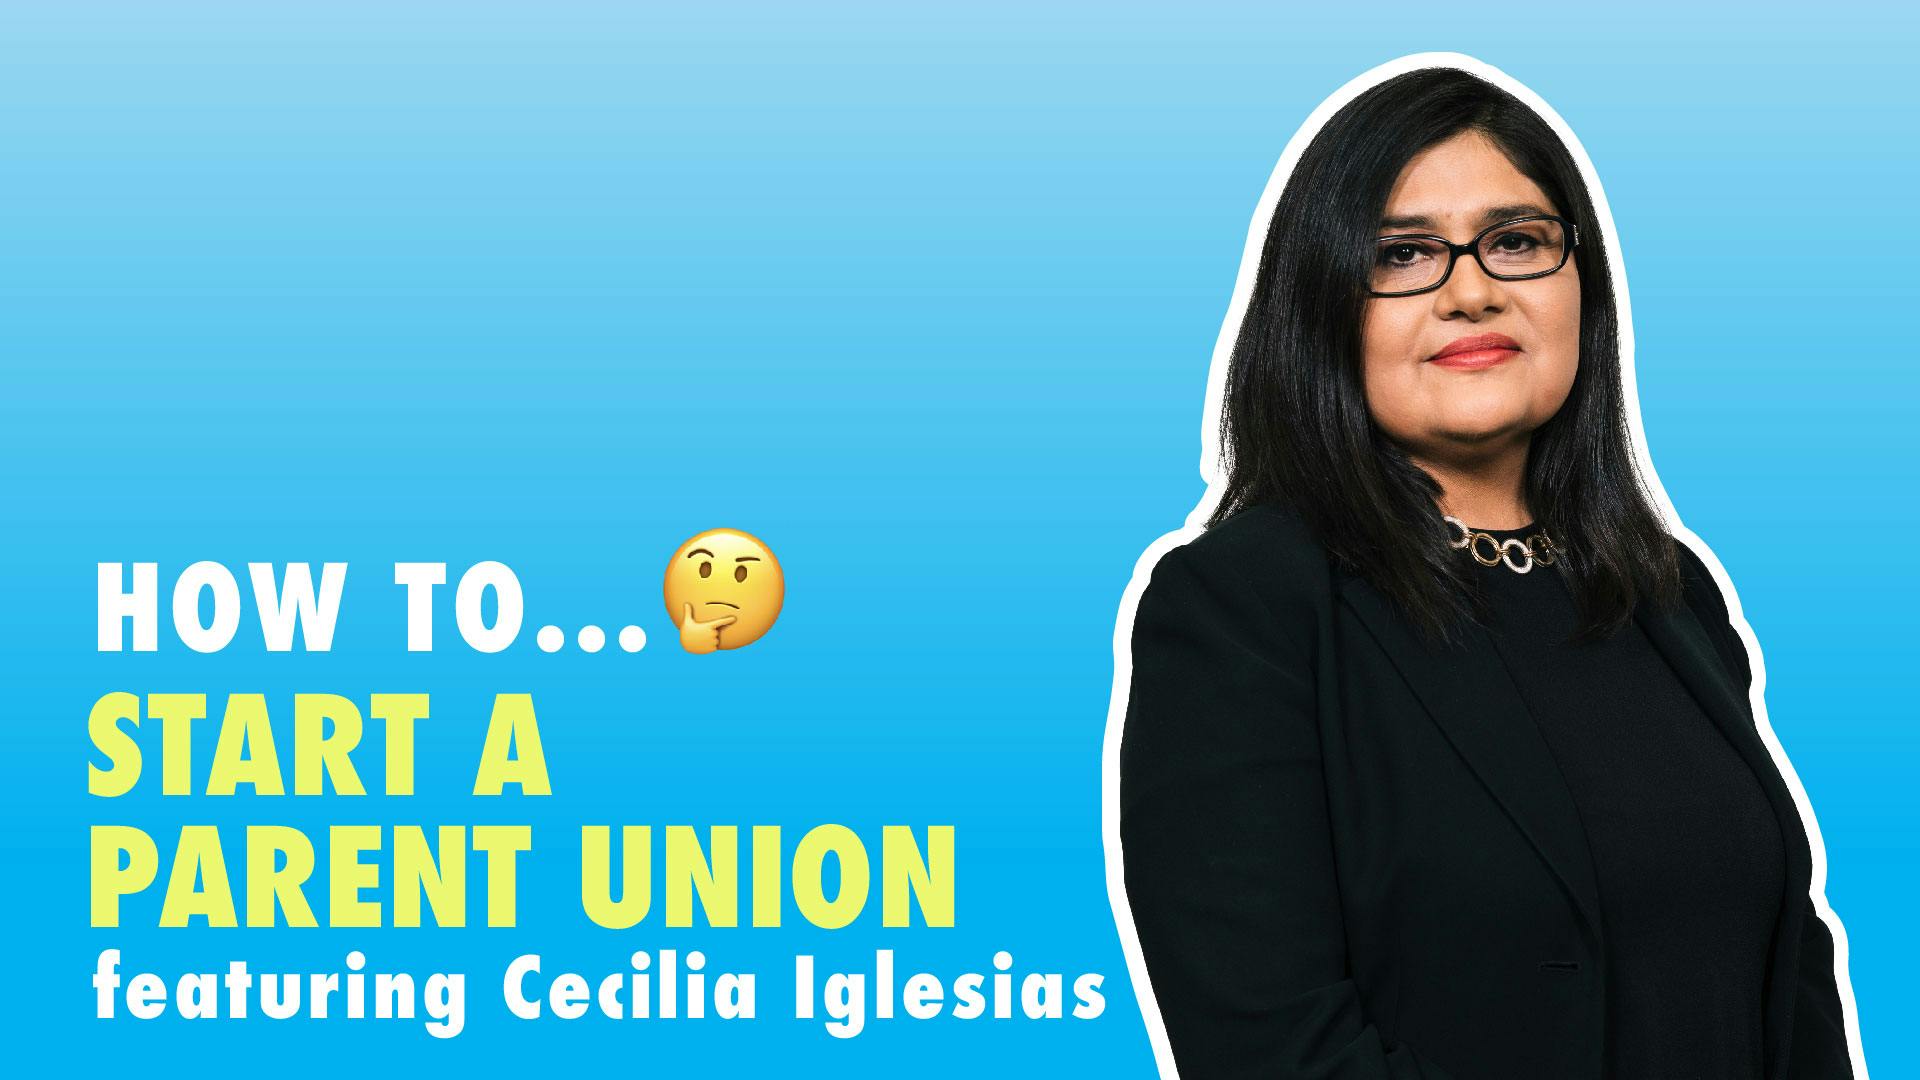 How To Start a Parent Union with Cecilia Iglesias